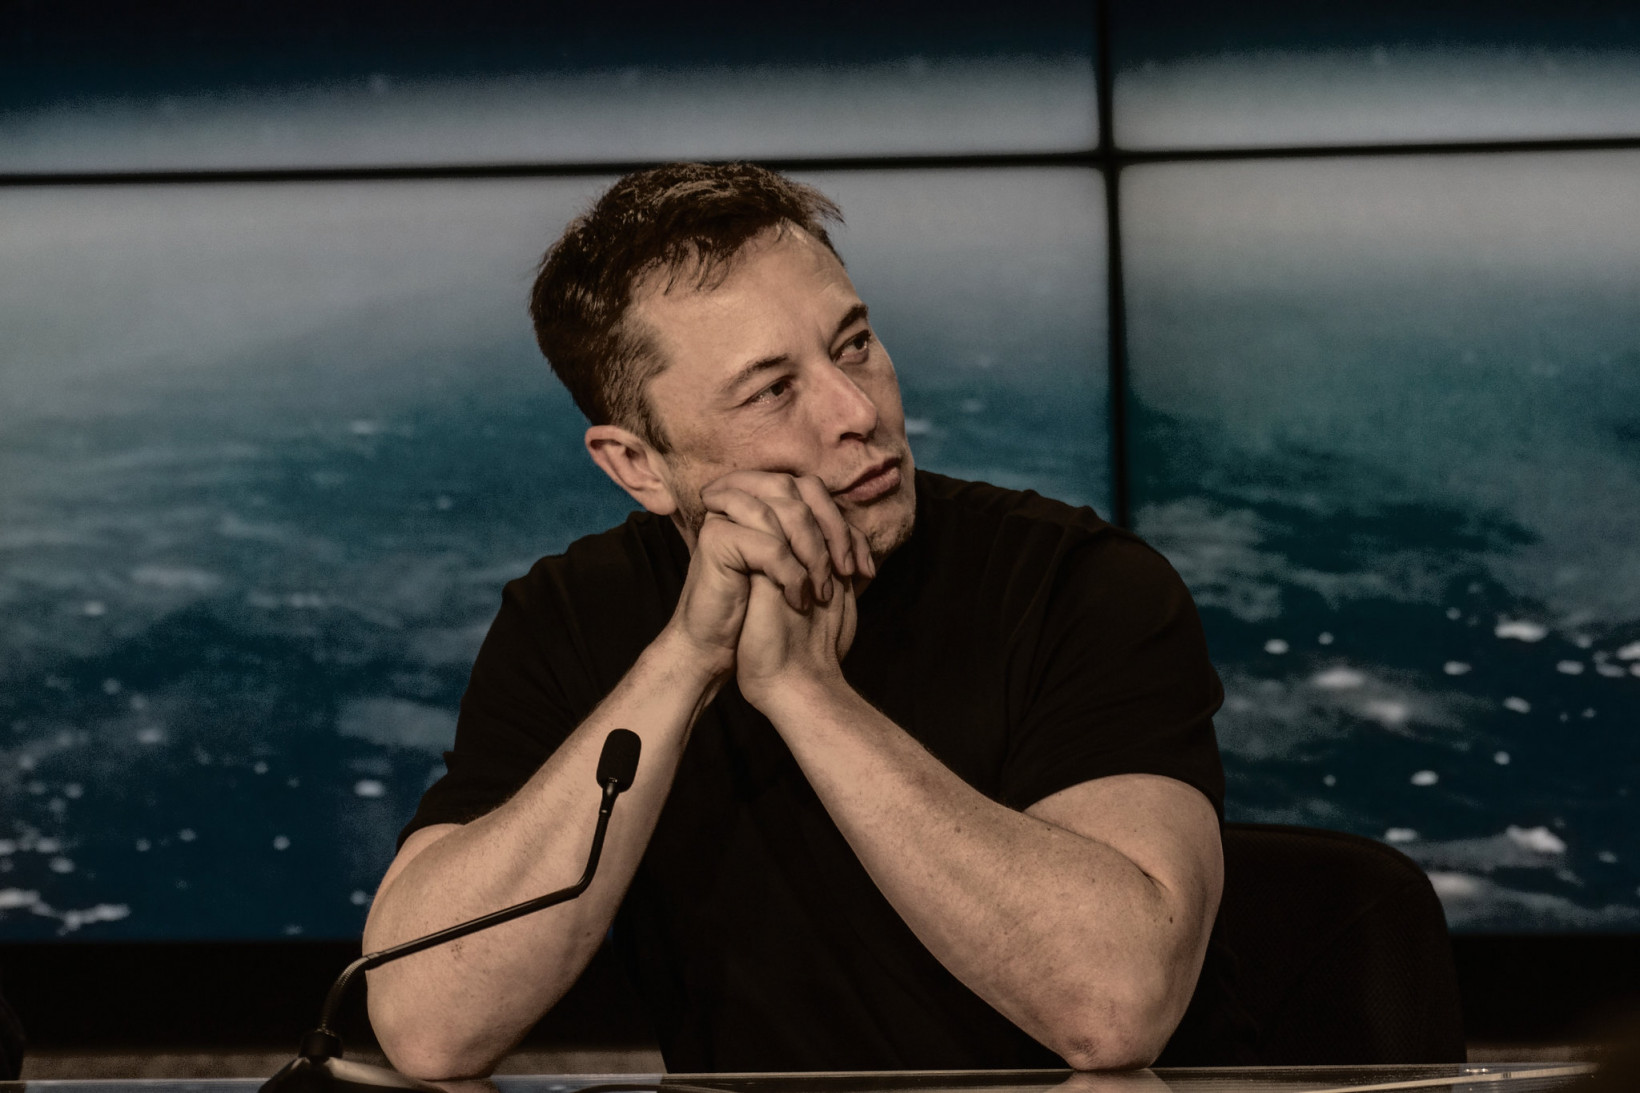 Elon Musk, CEO of Tesla Motors and SpaceX